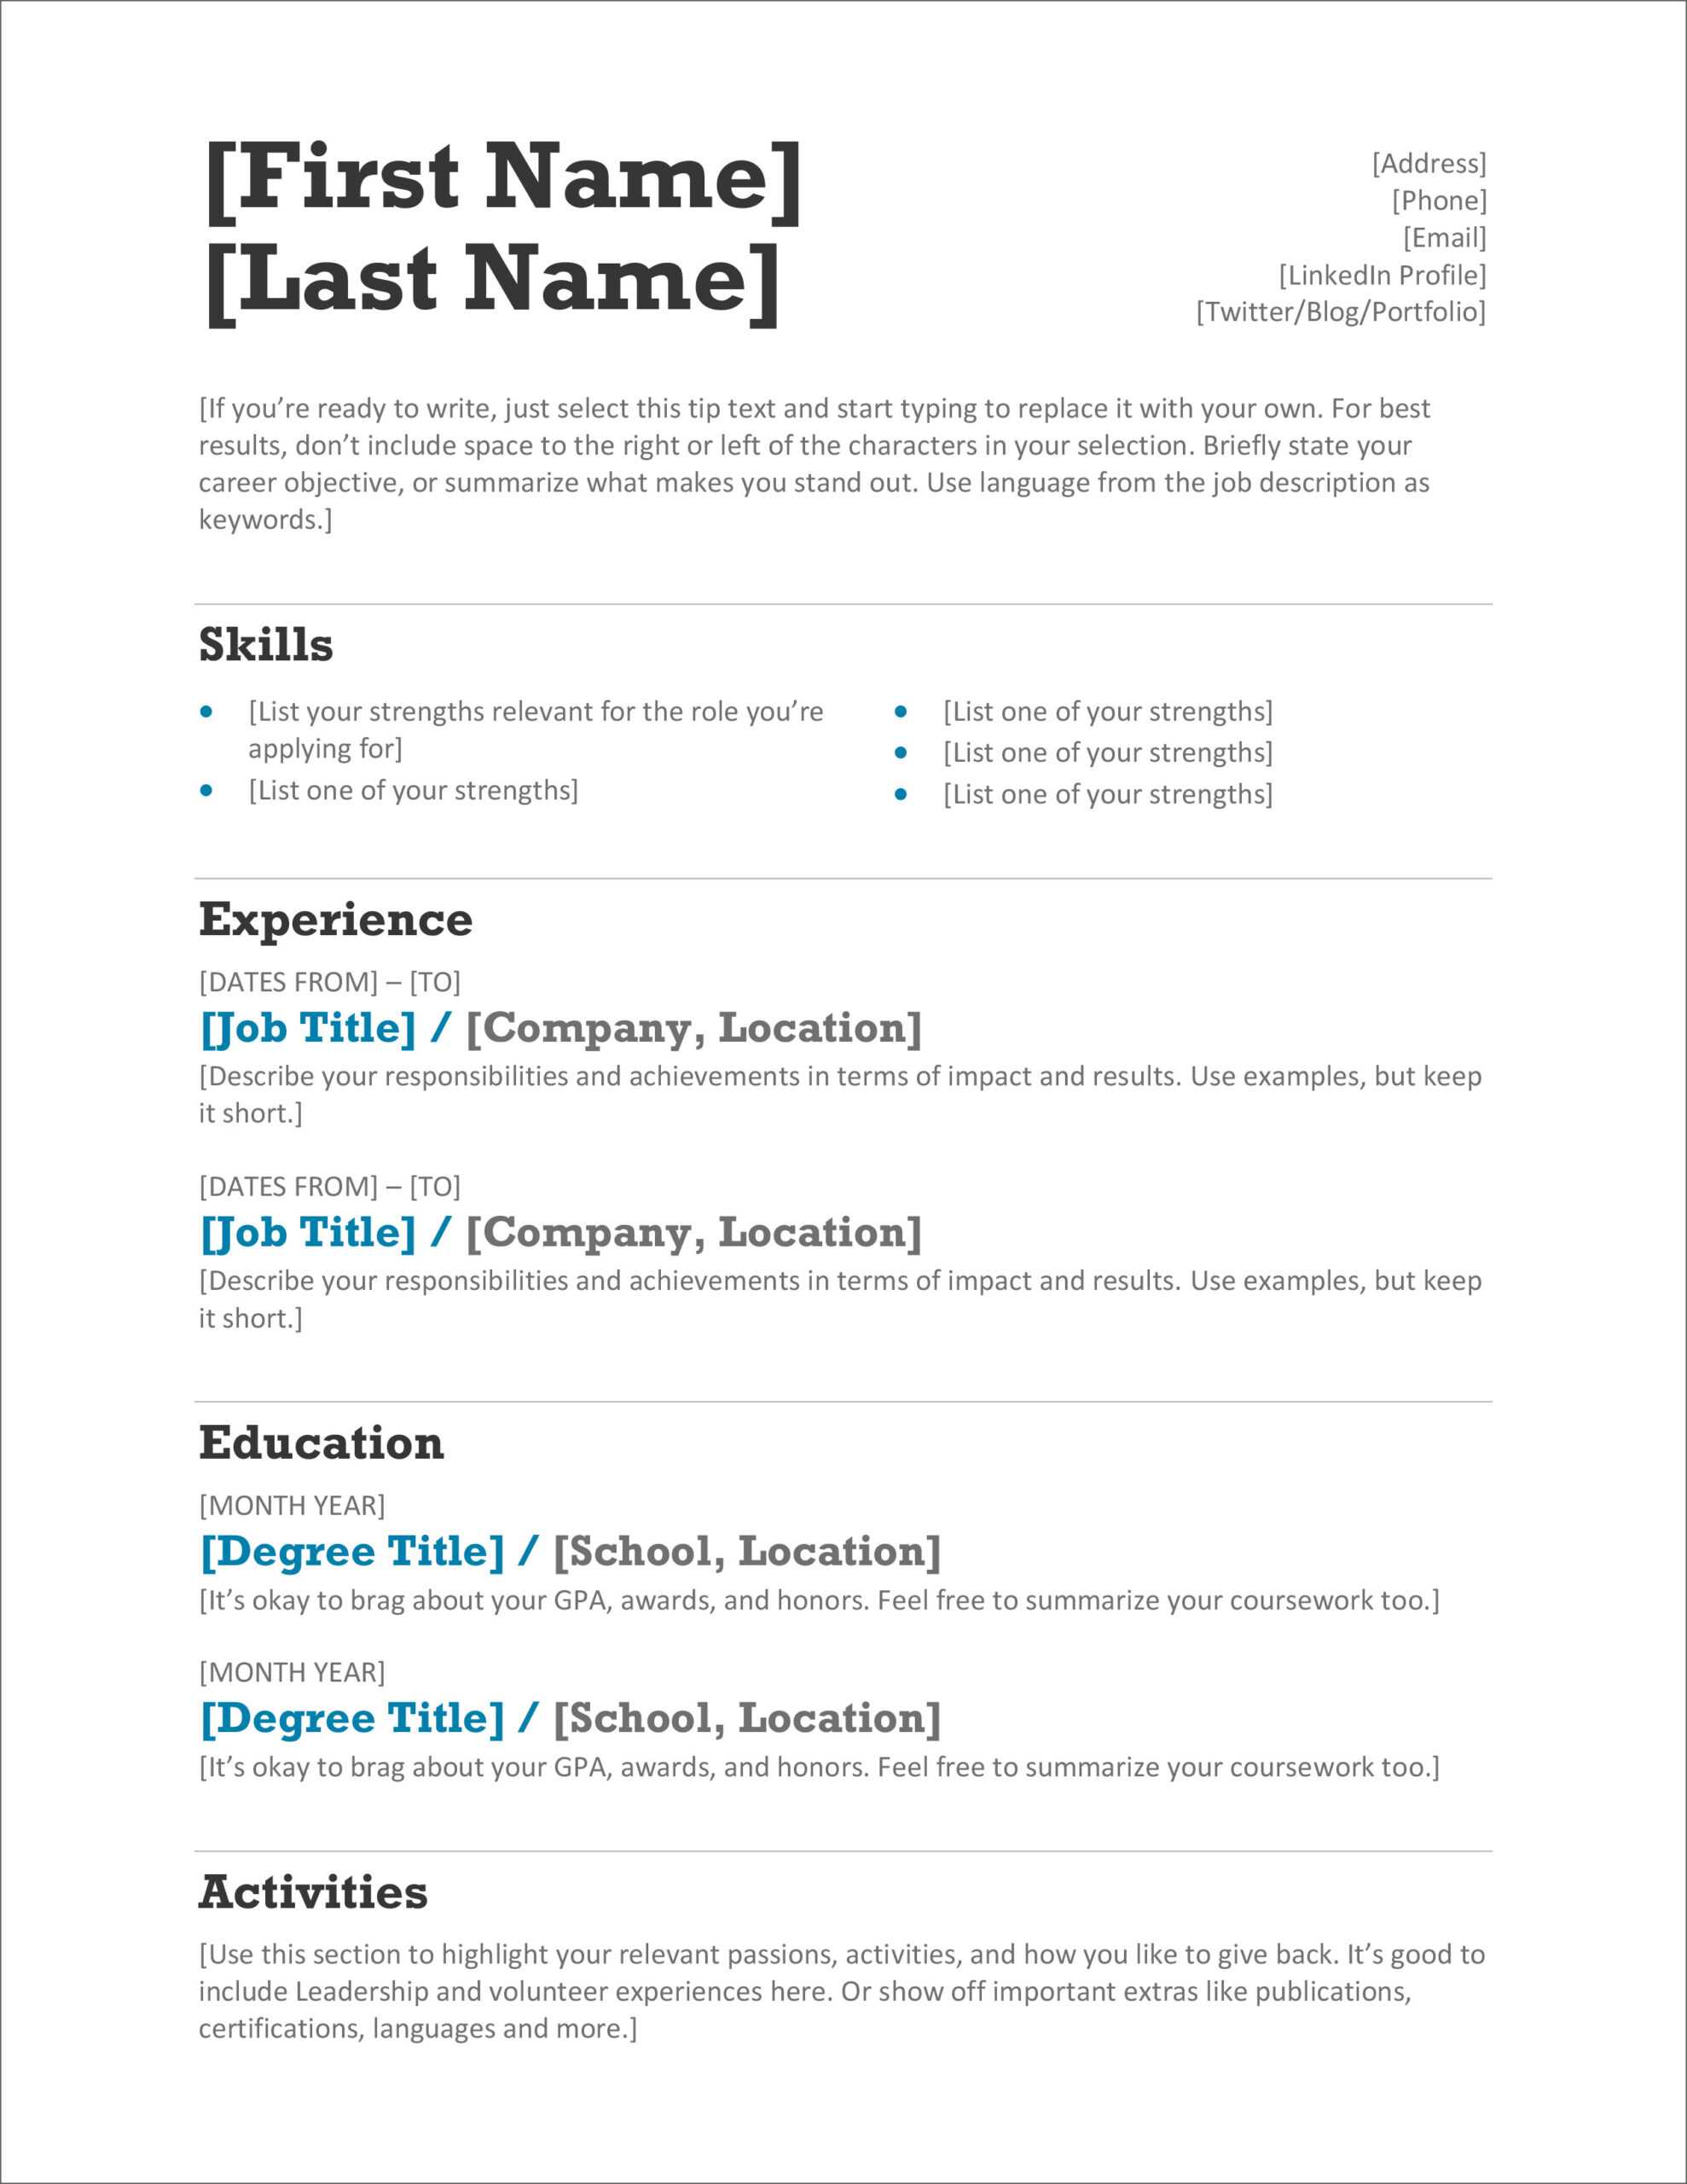 45 Free Modern Resume / Cv Templates – Minimalist, Simple Throughout How To Create A Cv Template In Word